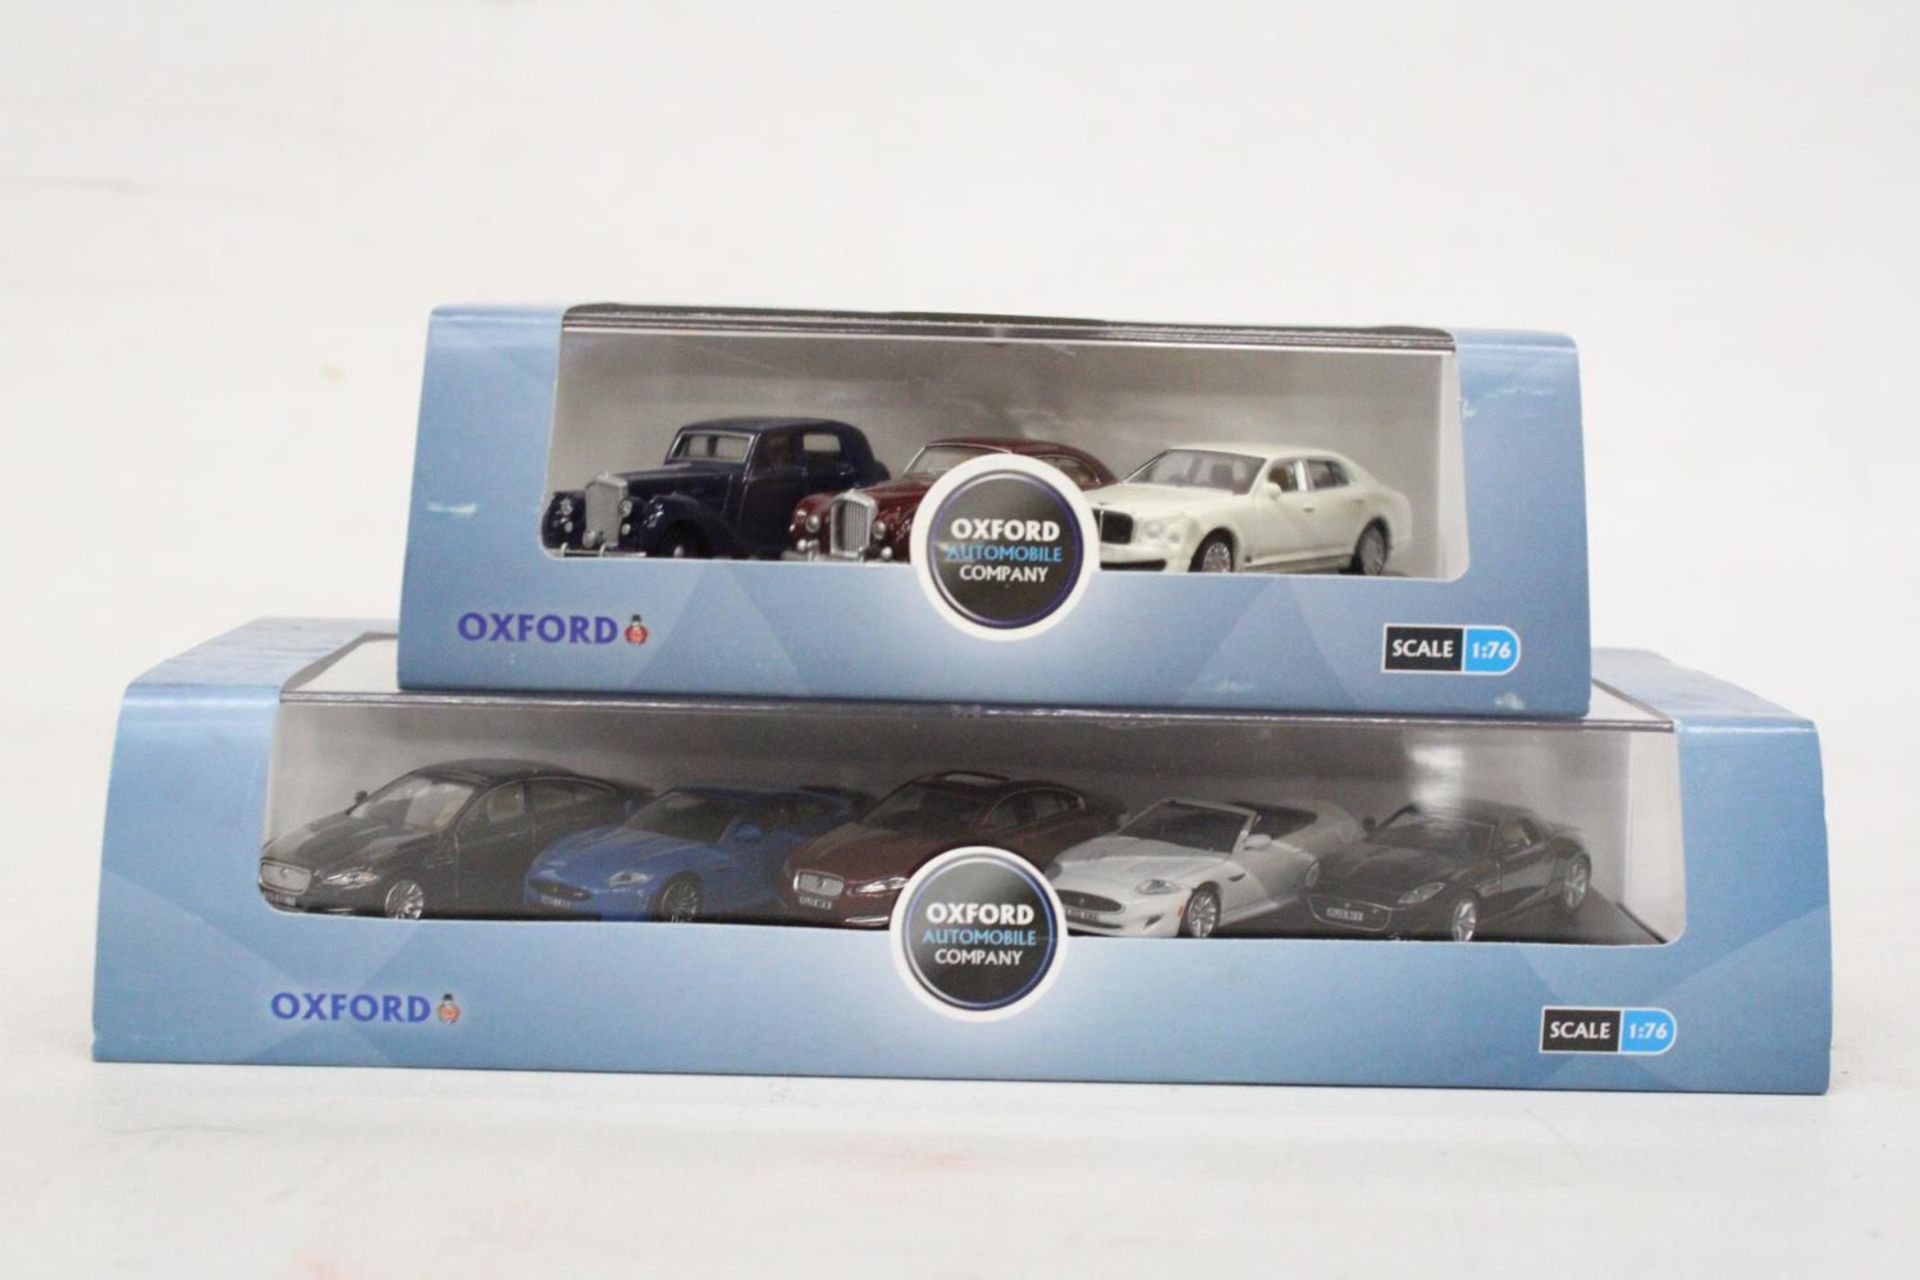 TWO AS NEW AND BOXED OXFORD AUTOMOBILE COMPANY SETS TO INCLUDE A FIVE PIECE JAGUAR XJ AND A THREE